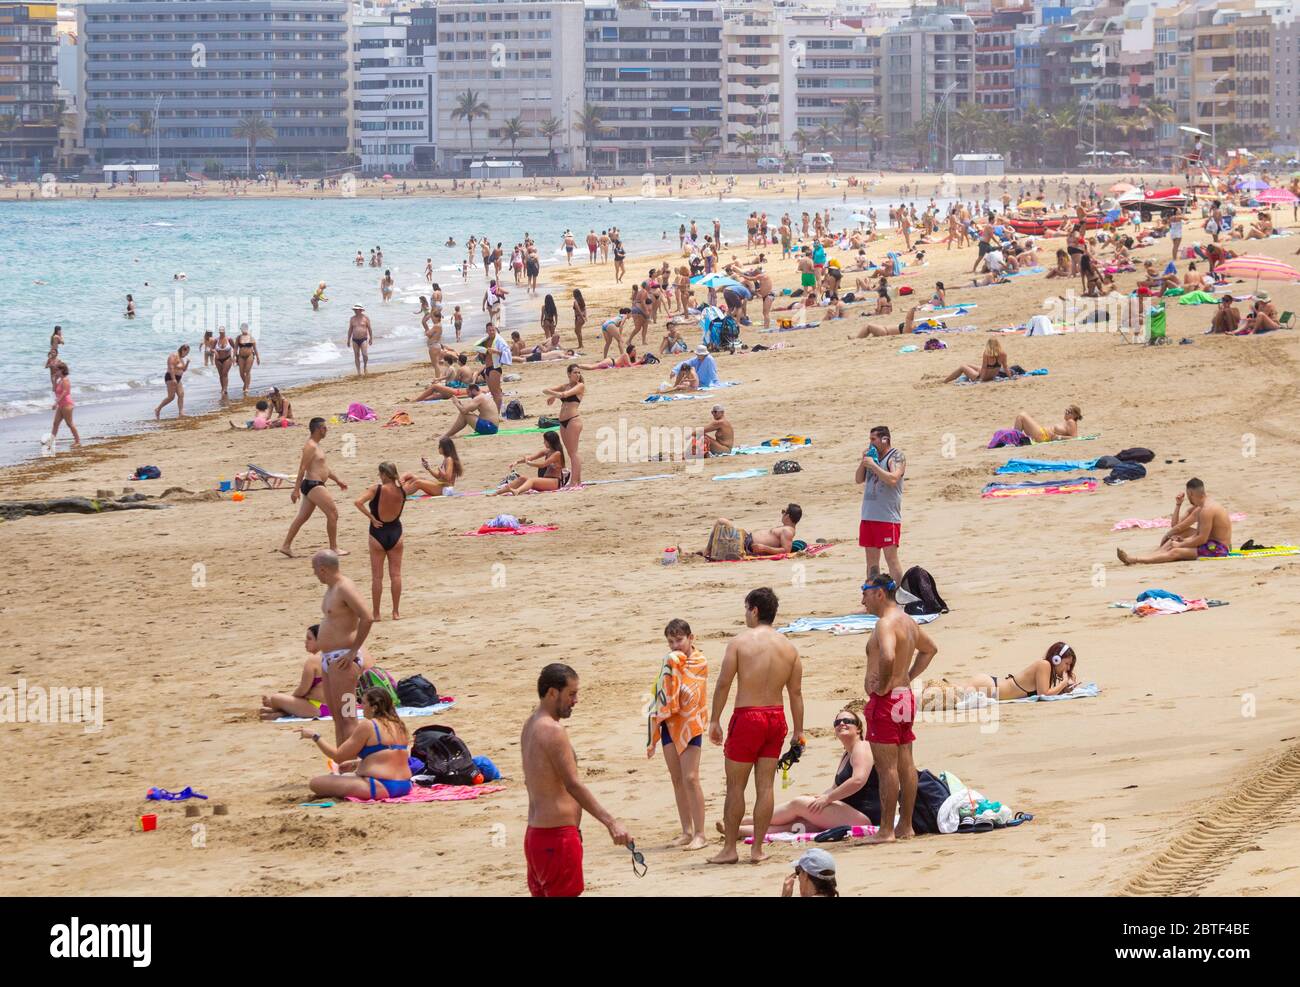 Las Palmas, Gran Canaria, Canary Islands, Spain. 25th May, 2020. Locals  bask on the city beach in Las Palmas on Gran Canaria as The Canary Islands,  and many other regions of Spain,